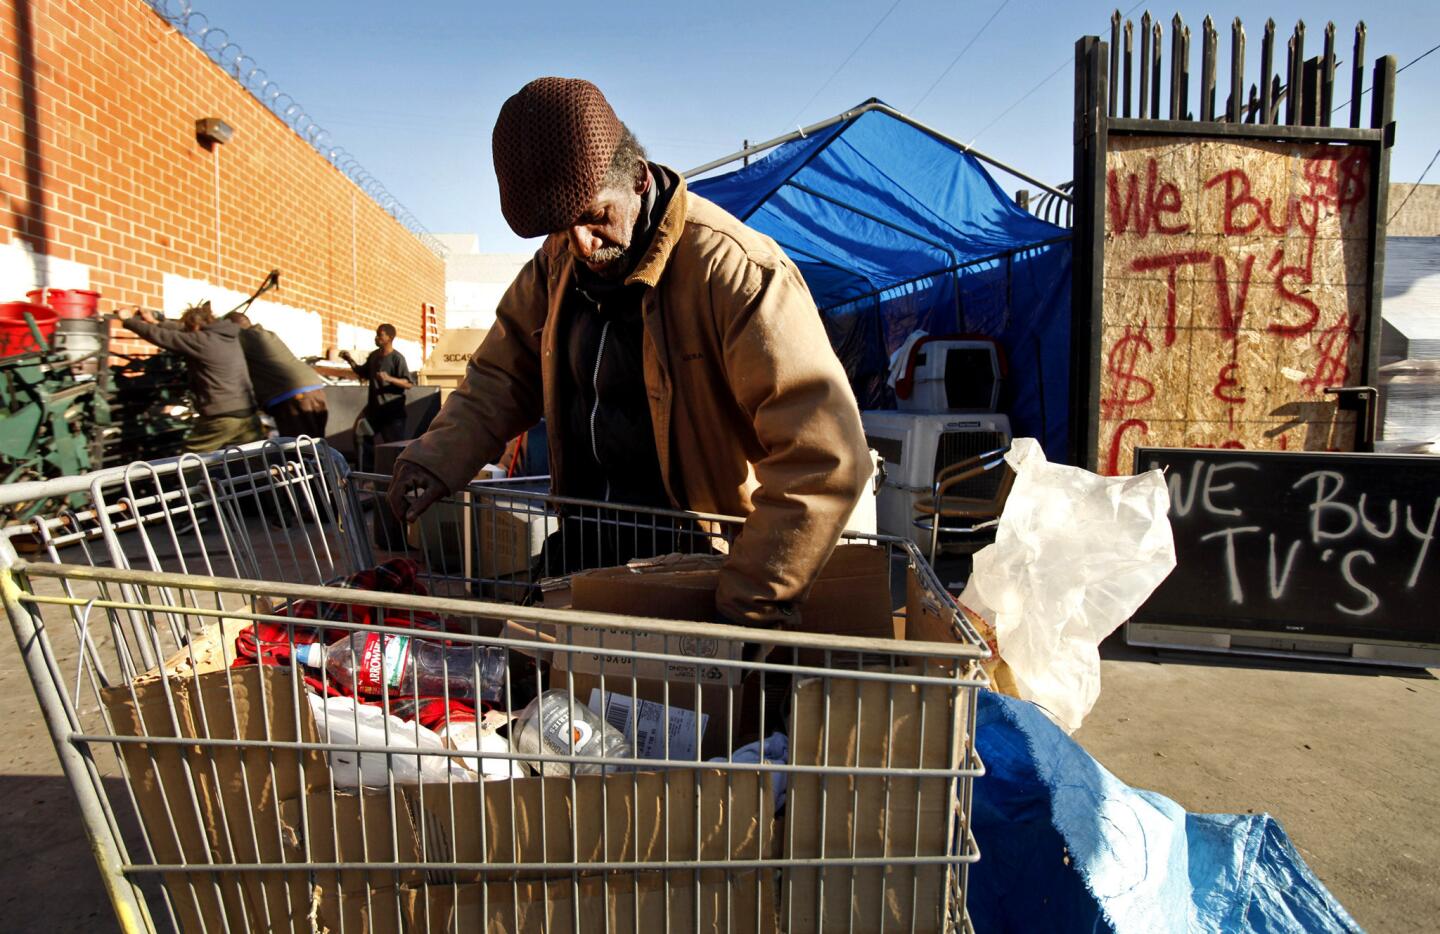 A man who goes by the name Double O sorts items he collected to recycle at West Coast Recycling at Towne Avenue and East 4th Street in downtown Los Angeles. Double O complained about a state law that took effect Nov. 1 reducing how much money he can get for wine, liquor and milk bottles.